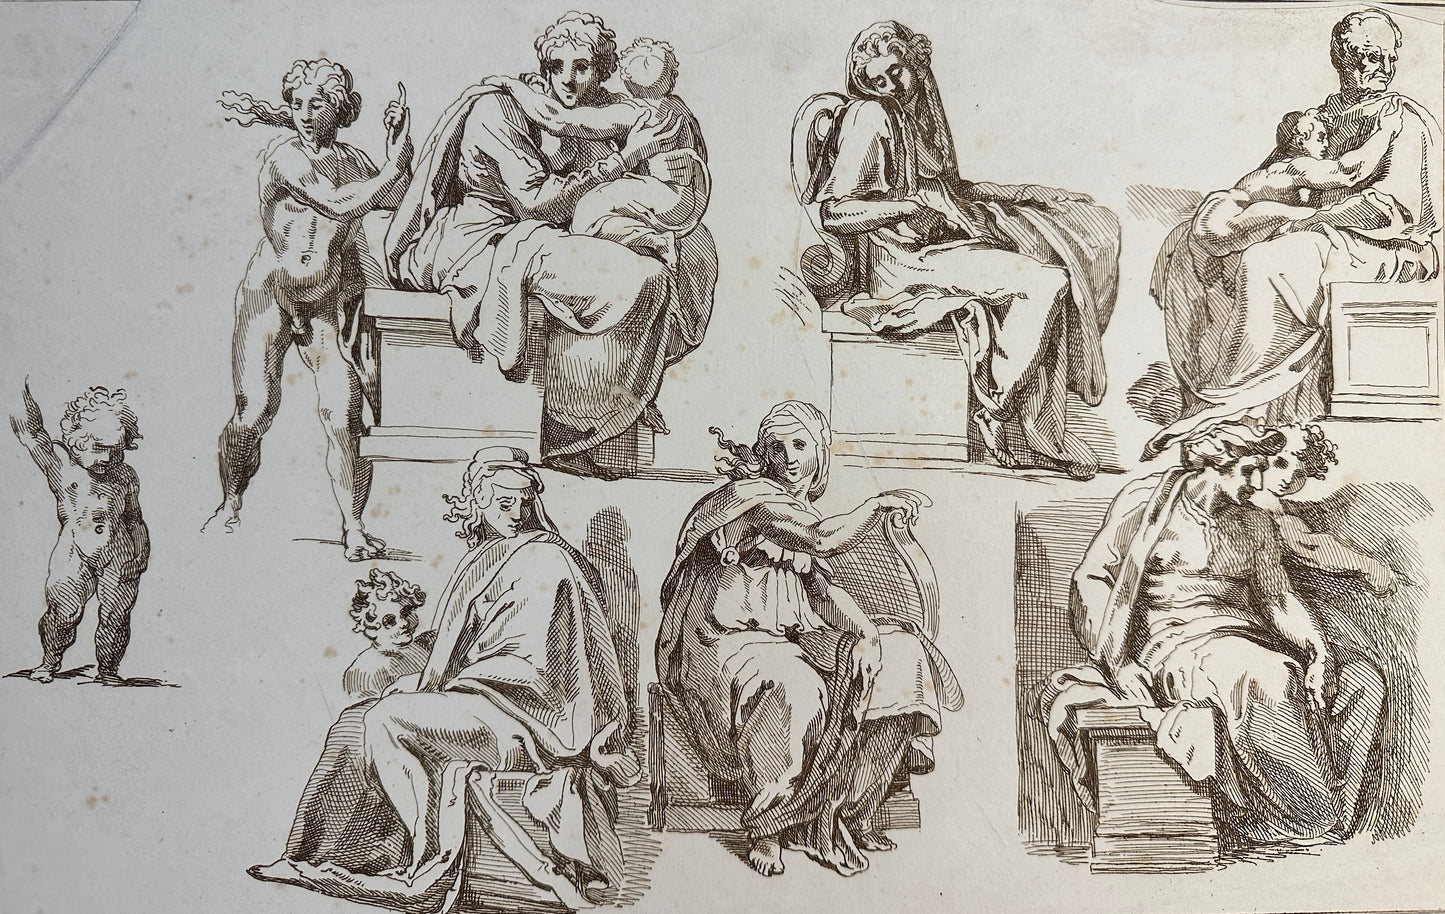 Conrad Martin Metz (1749-1827) Engraving - After Michelangelo Buonarroti (1475-1564): Studies from the ceiling of the Sistine Chapel - Michael Angelo